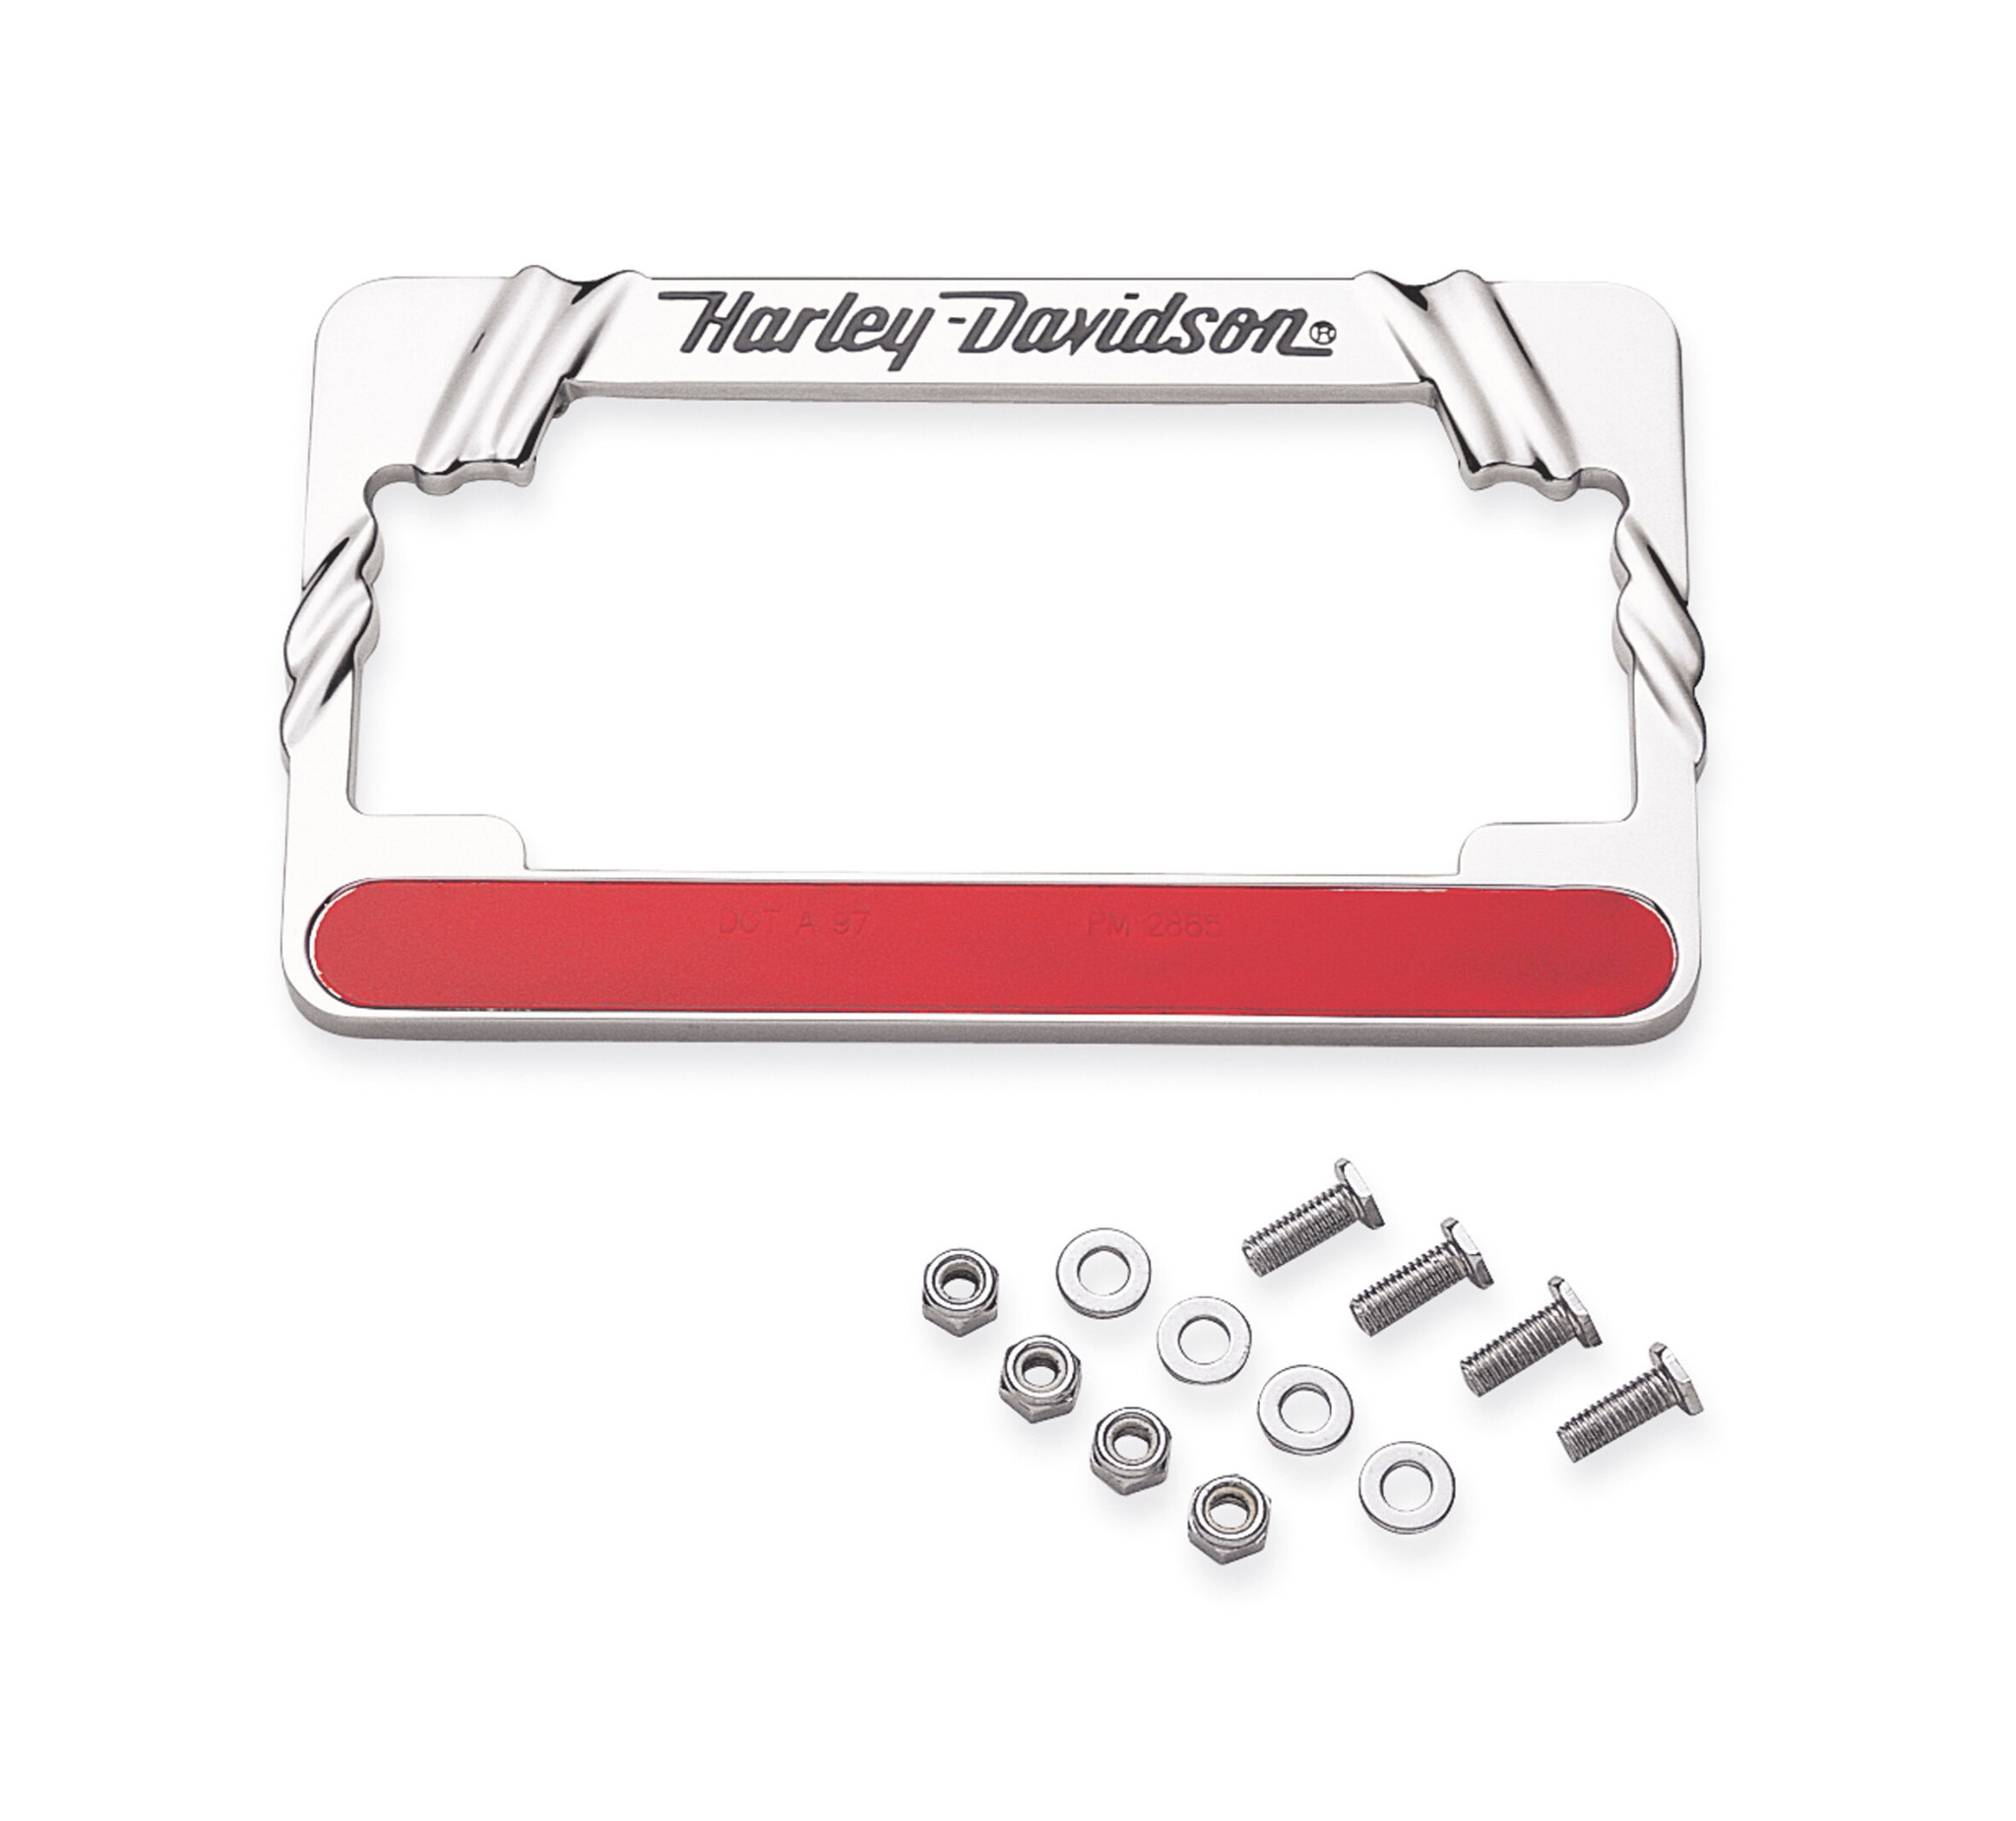 MOTORCYCLE LICENSE PLATE FRAME LADY RIDER  DESIGN